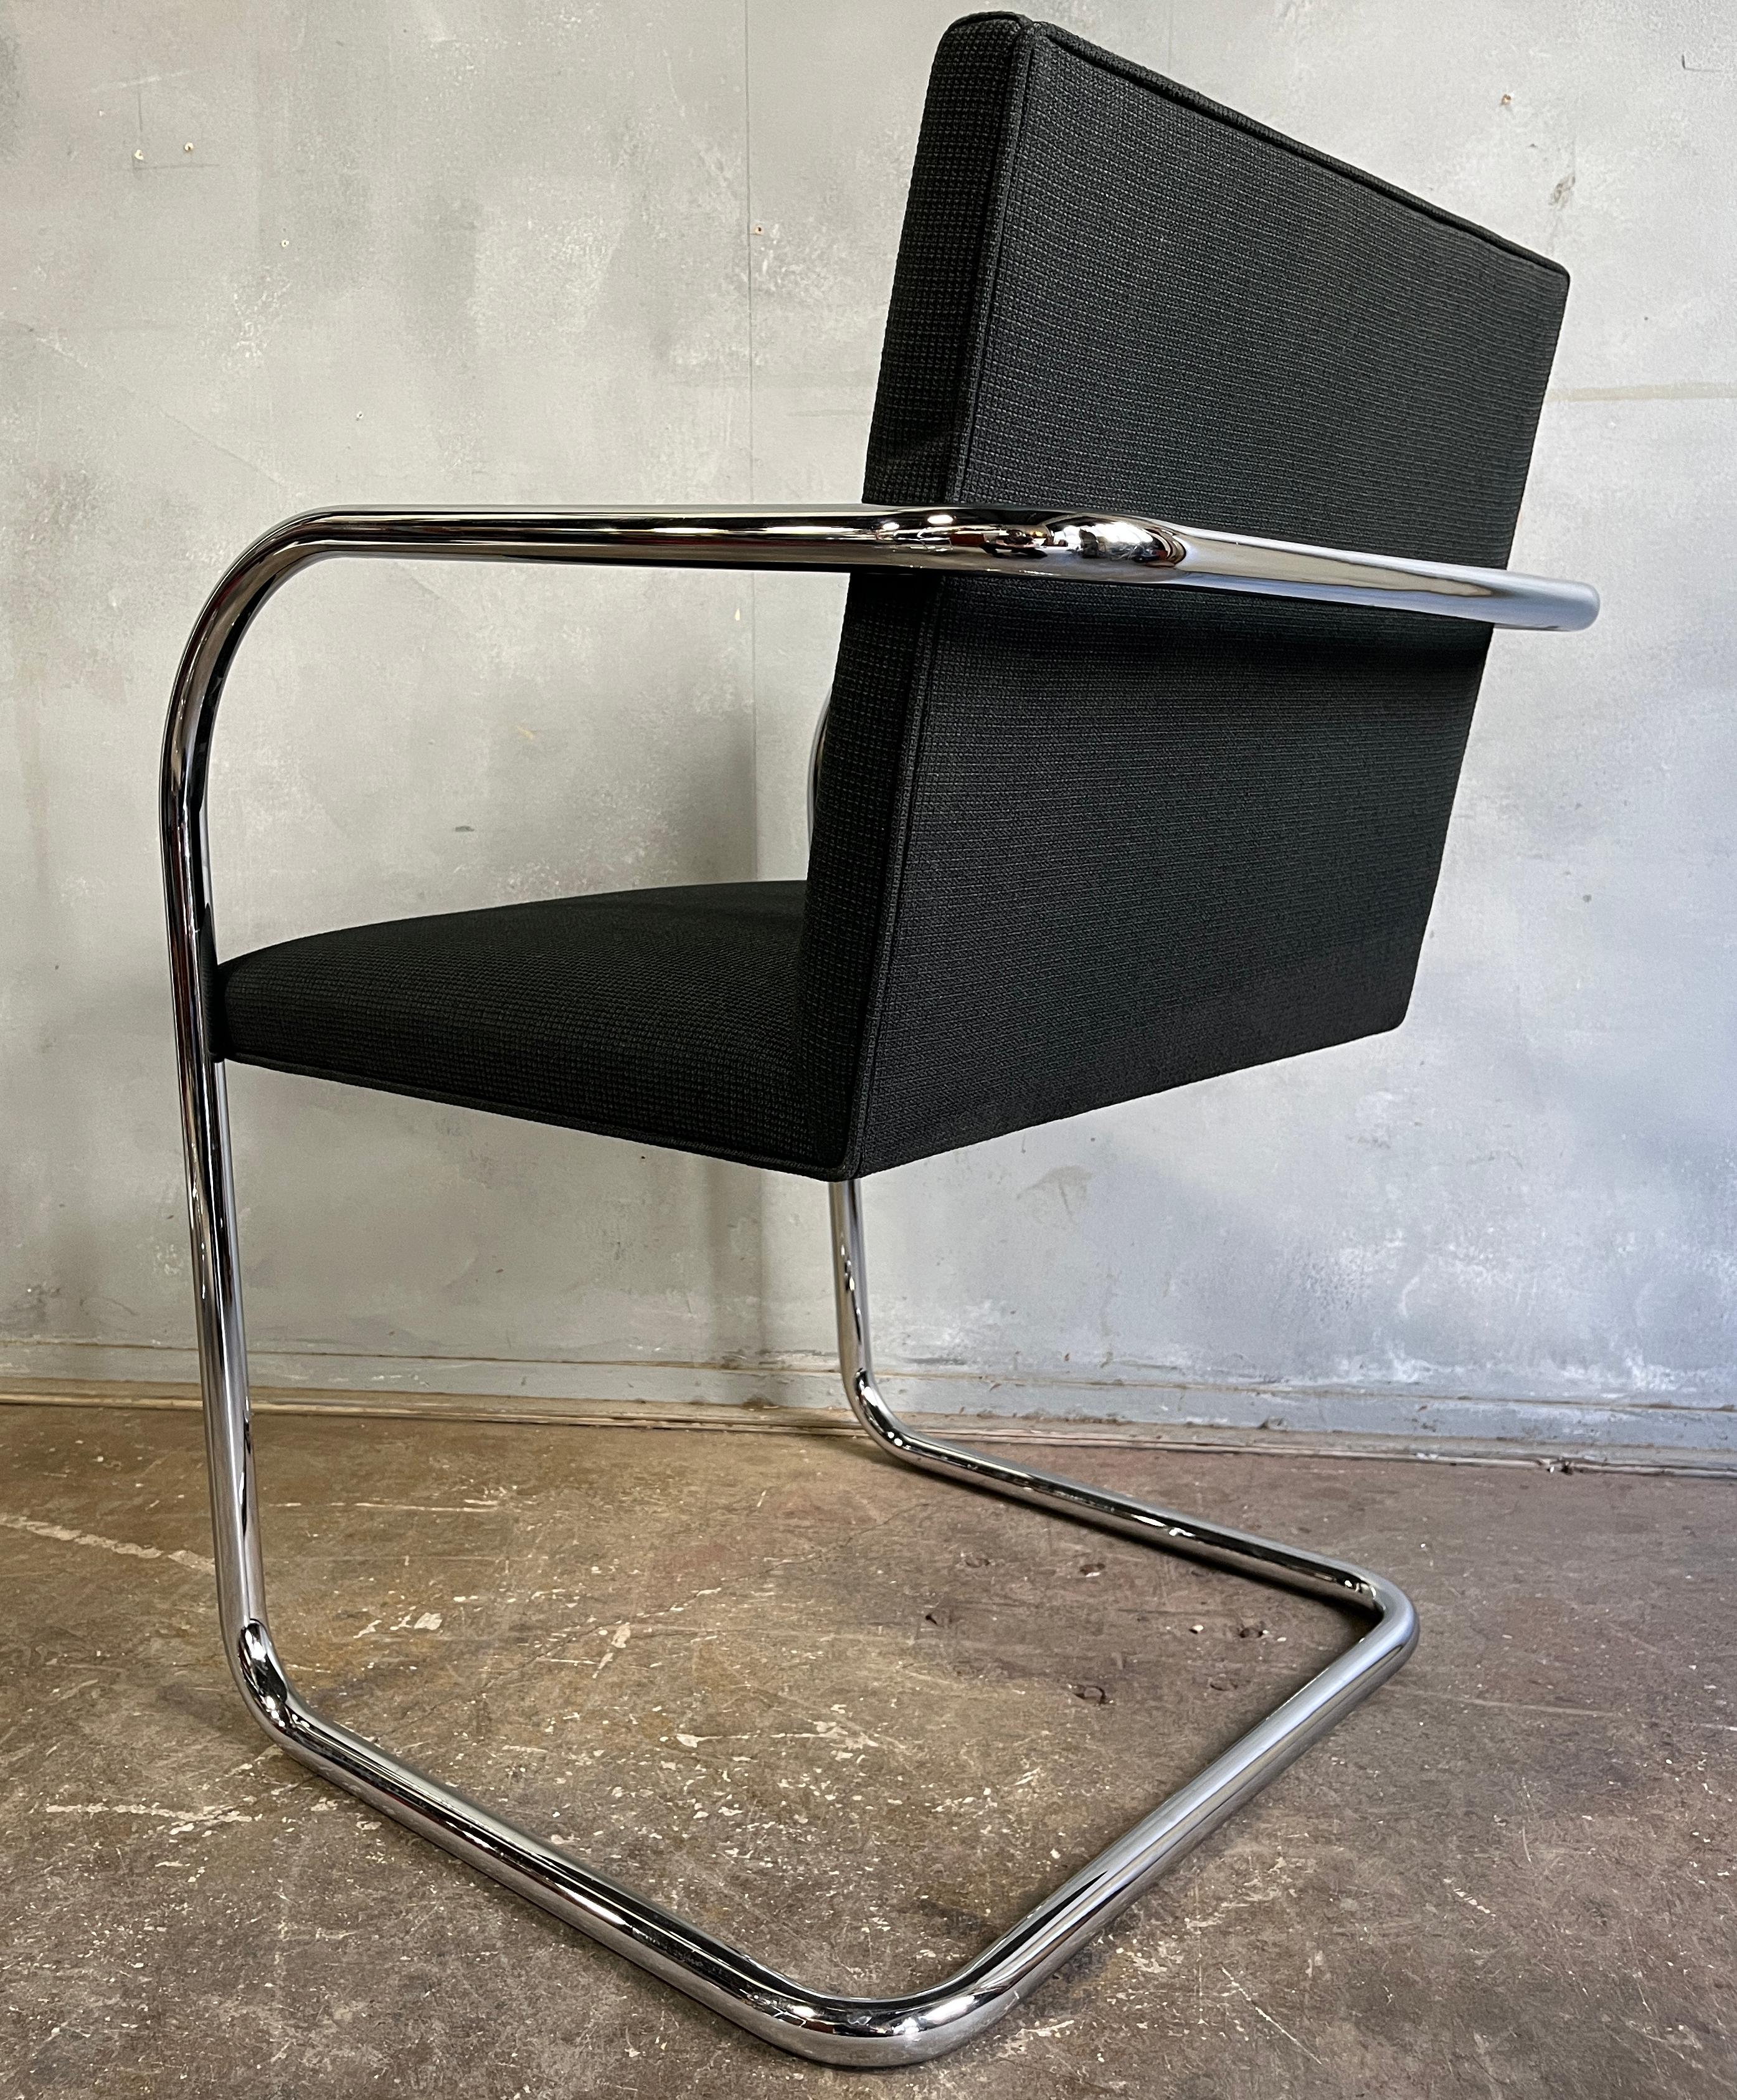 American Midcentury Knoll Brno Chairs by Mies Van Der Rohe in Black 30 Available For Sale